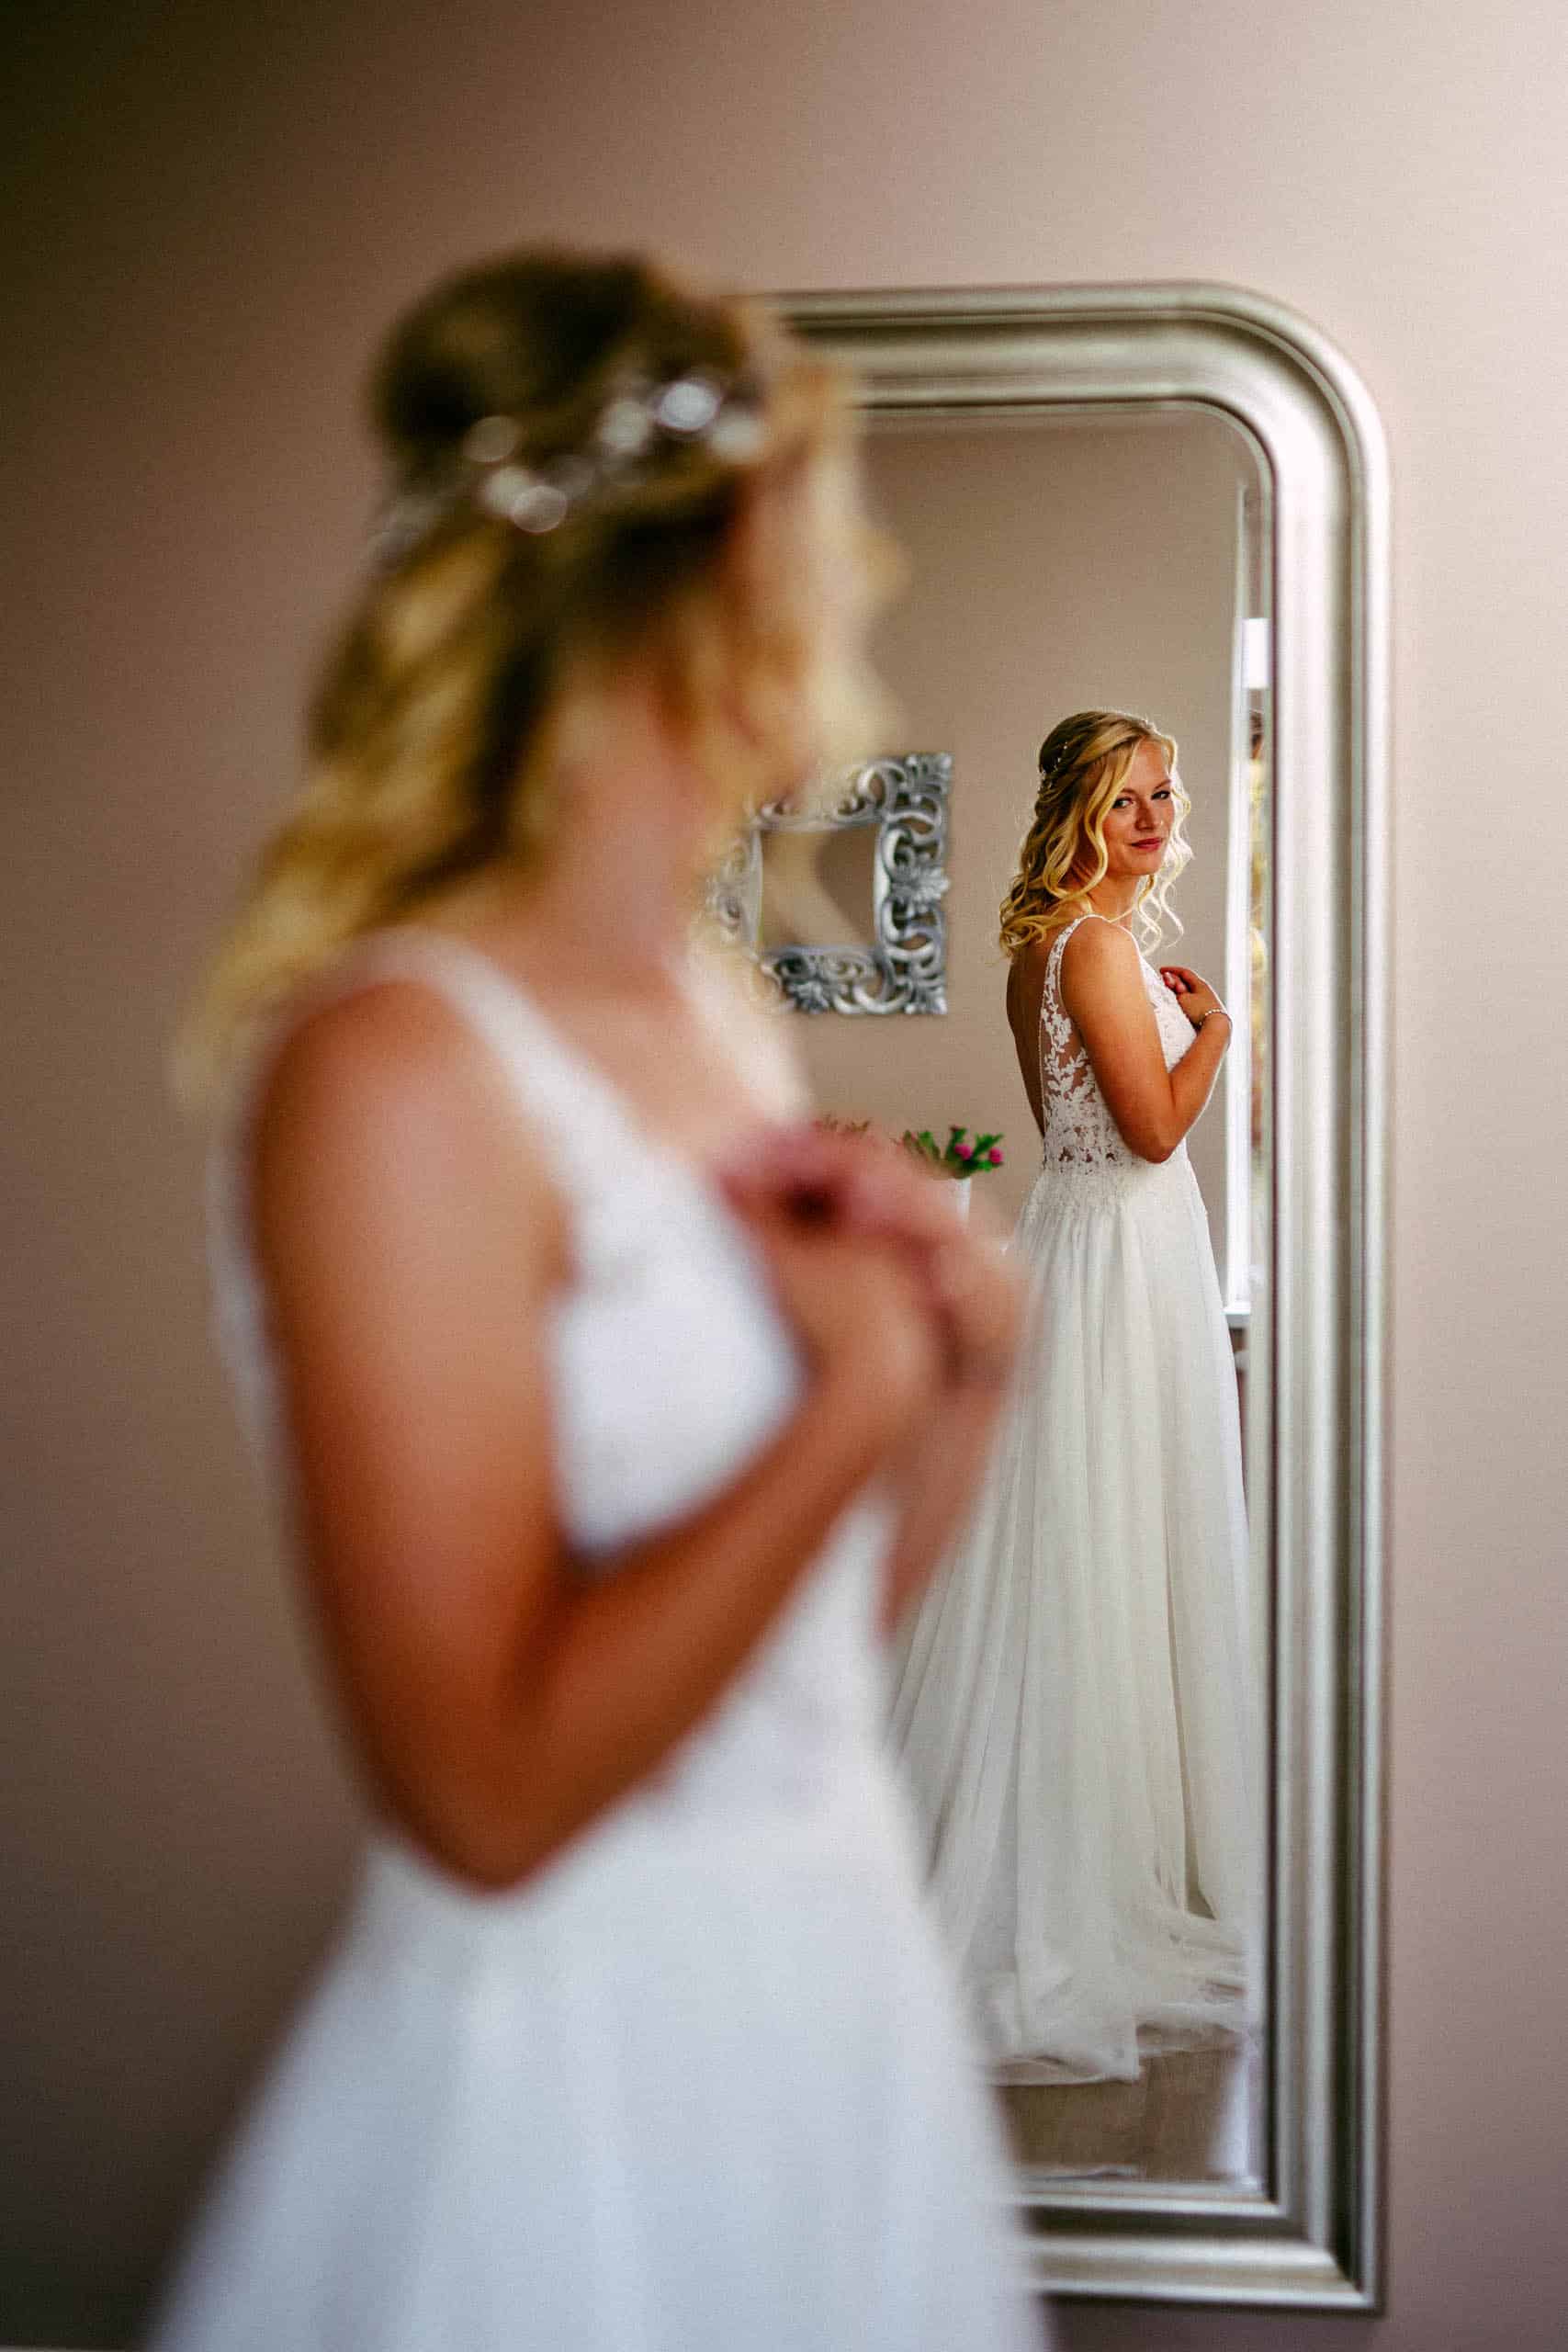 A bride in wedding dress looking at herself in the mirror while referring to her wedding checklist.